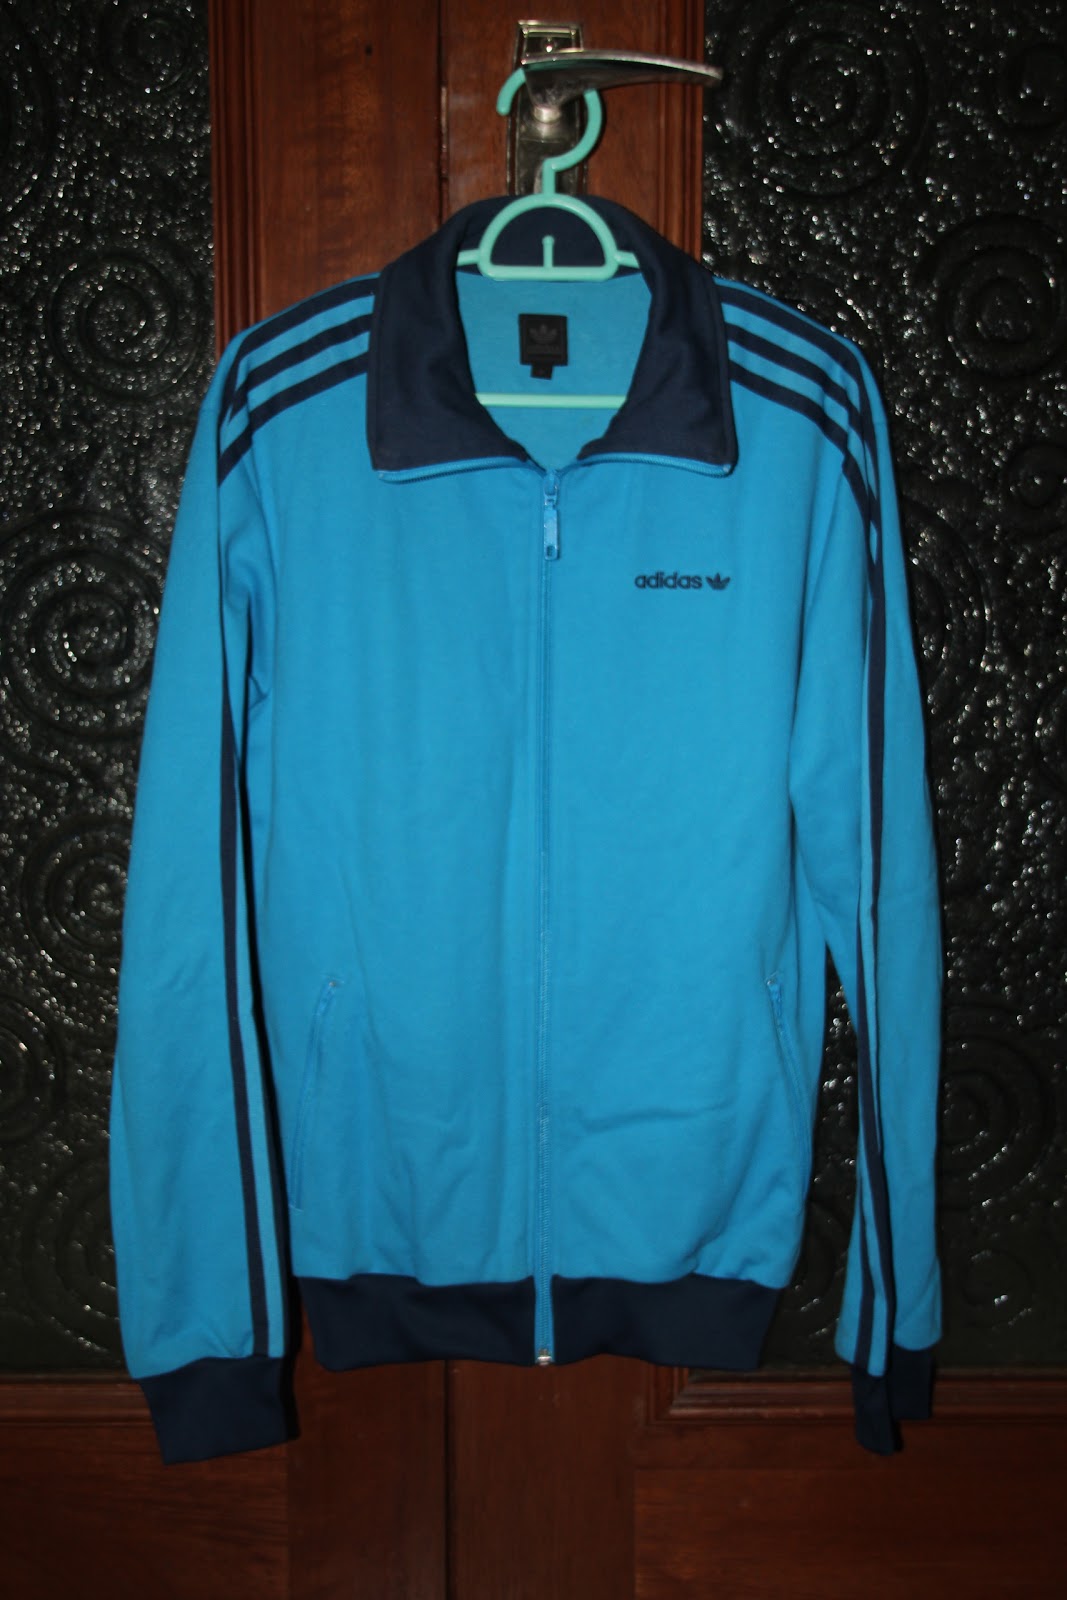 Hipster Closet: Authentic Vintage Adidas sweater - RM175